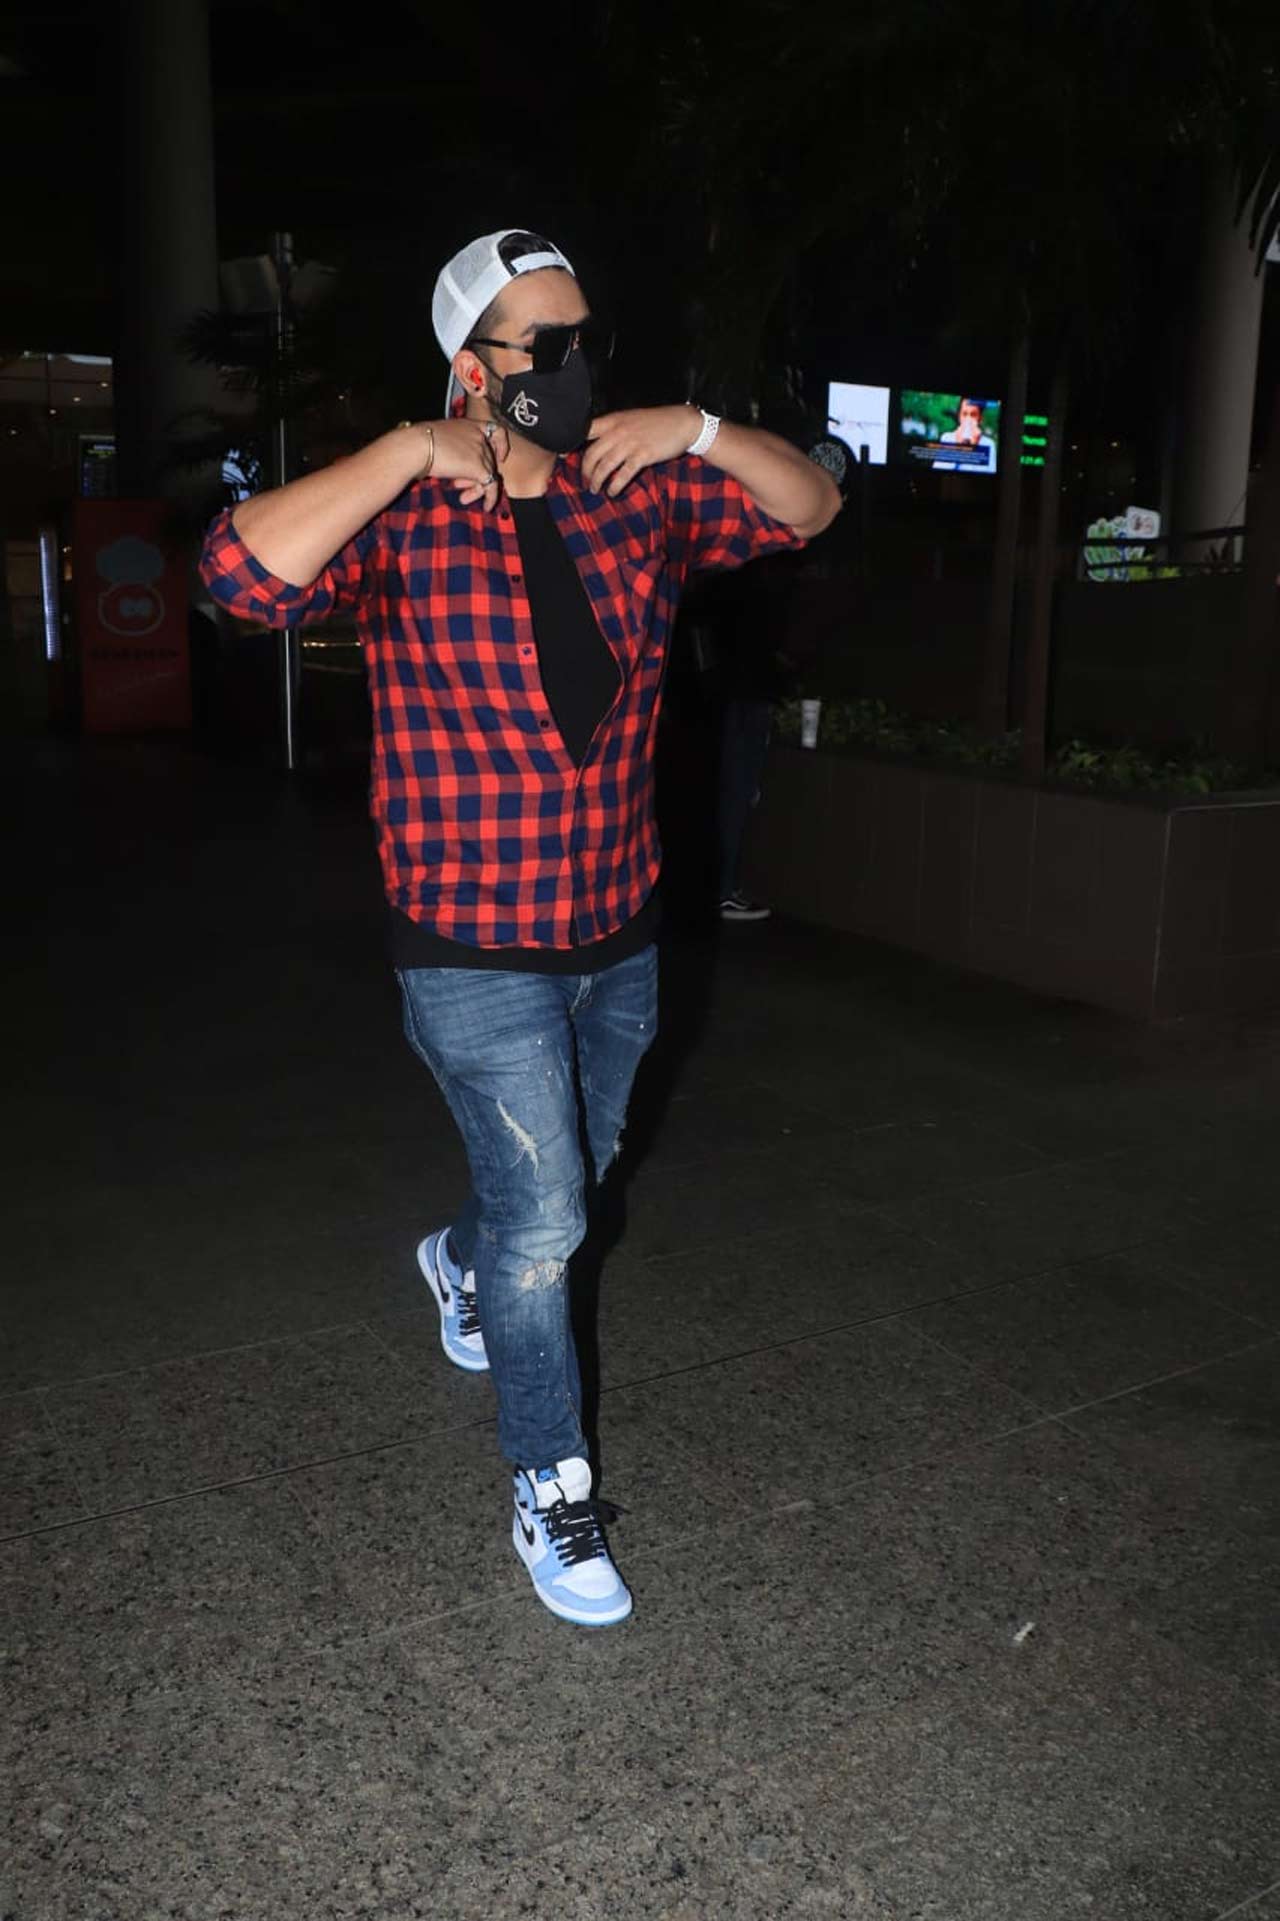 Bigg Boss 14 contestant Aly Goni was also spotted at the Mumbai airport.